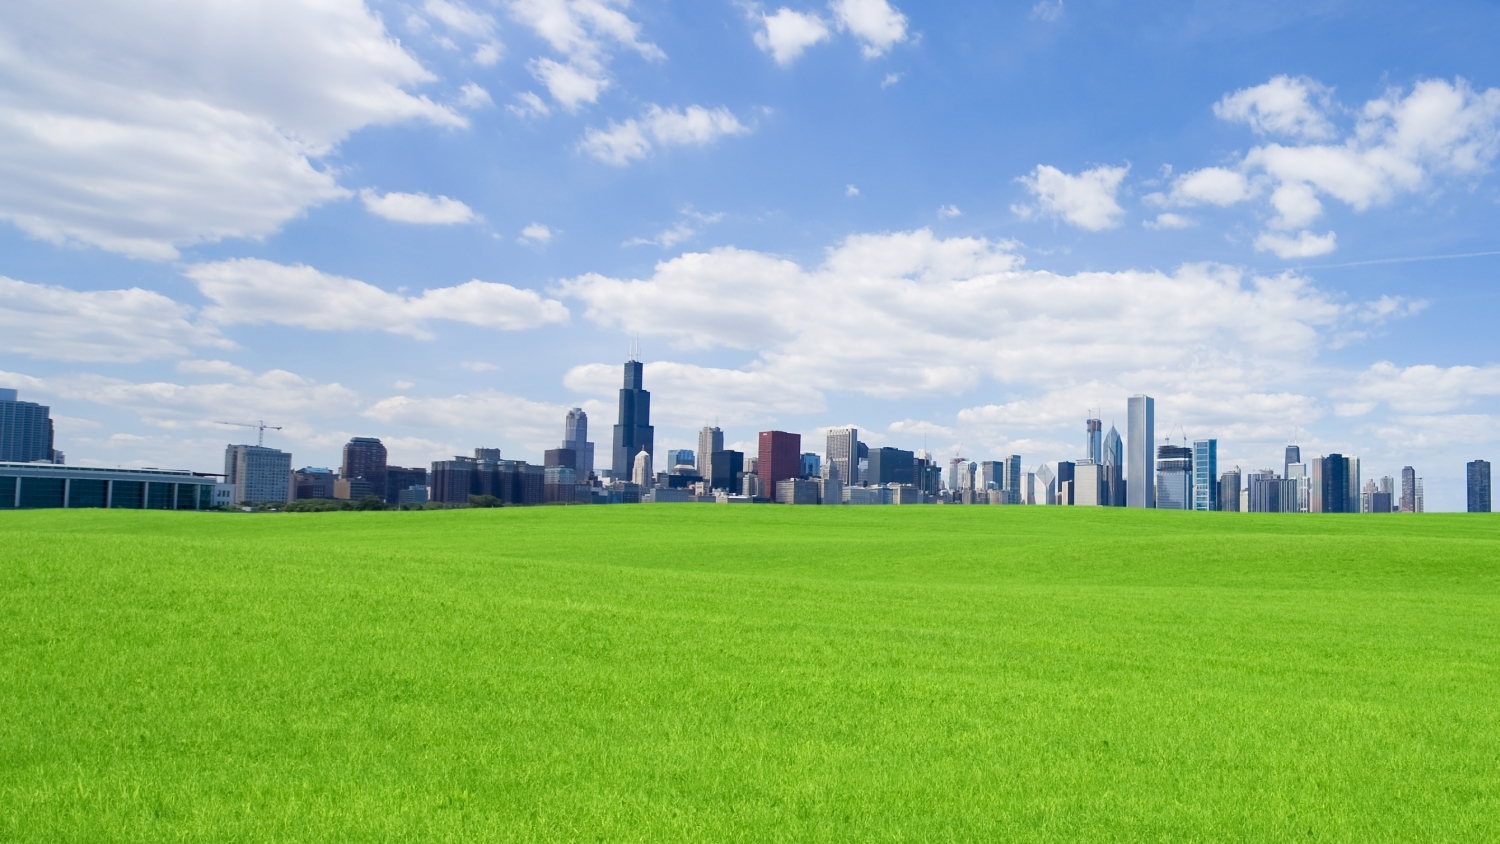 News Article climate change Cushman&Wakefield green report sustainability